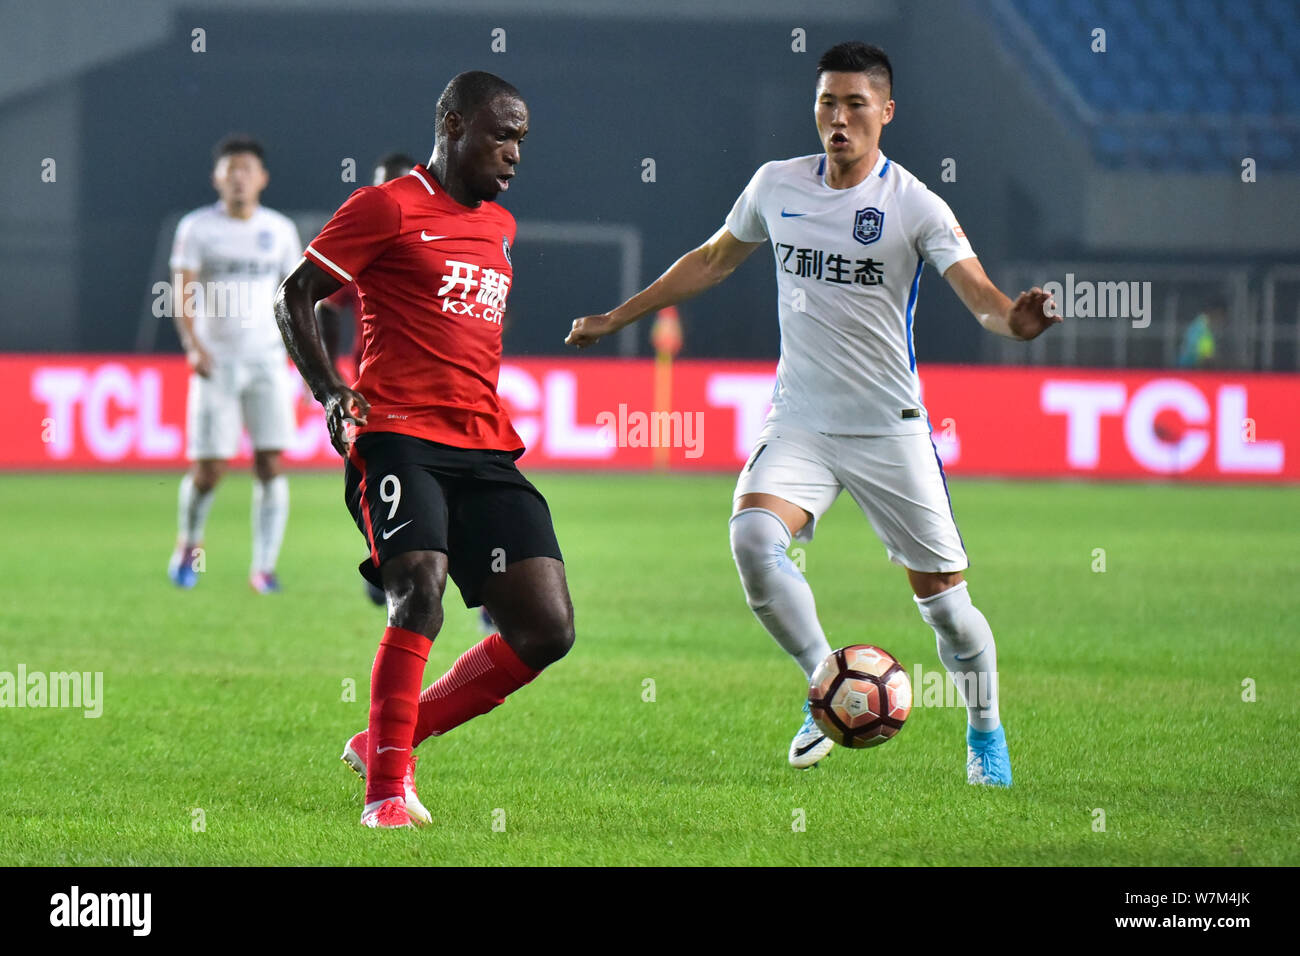 Nigerian football player Anthony Ujah, left, of Liaoning Whowin, challenges South Korean football player Hwang Seok-ho of Tianjin TEDA in their 23rd r Stock Photo